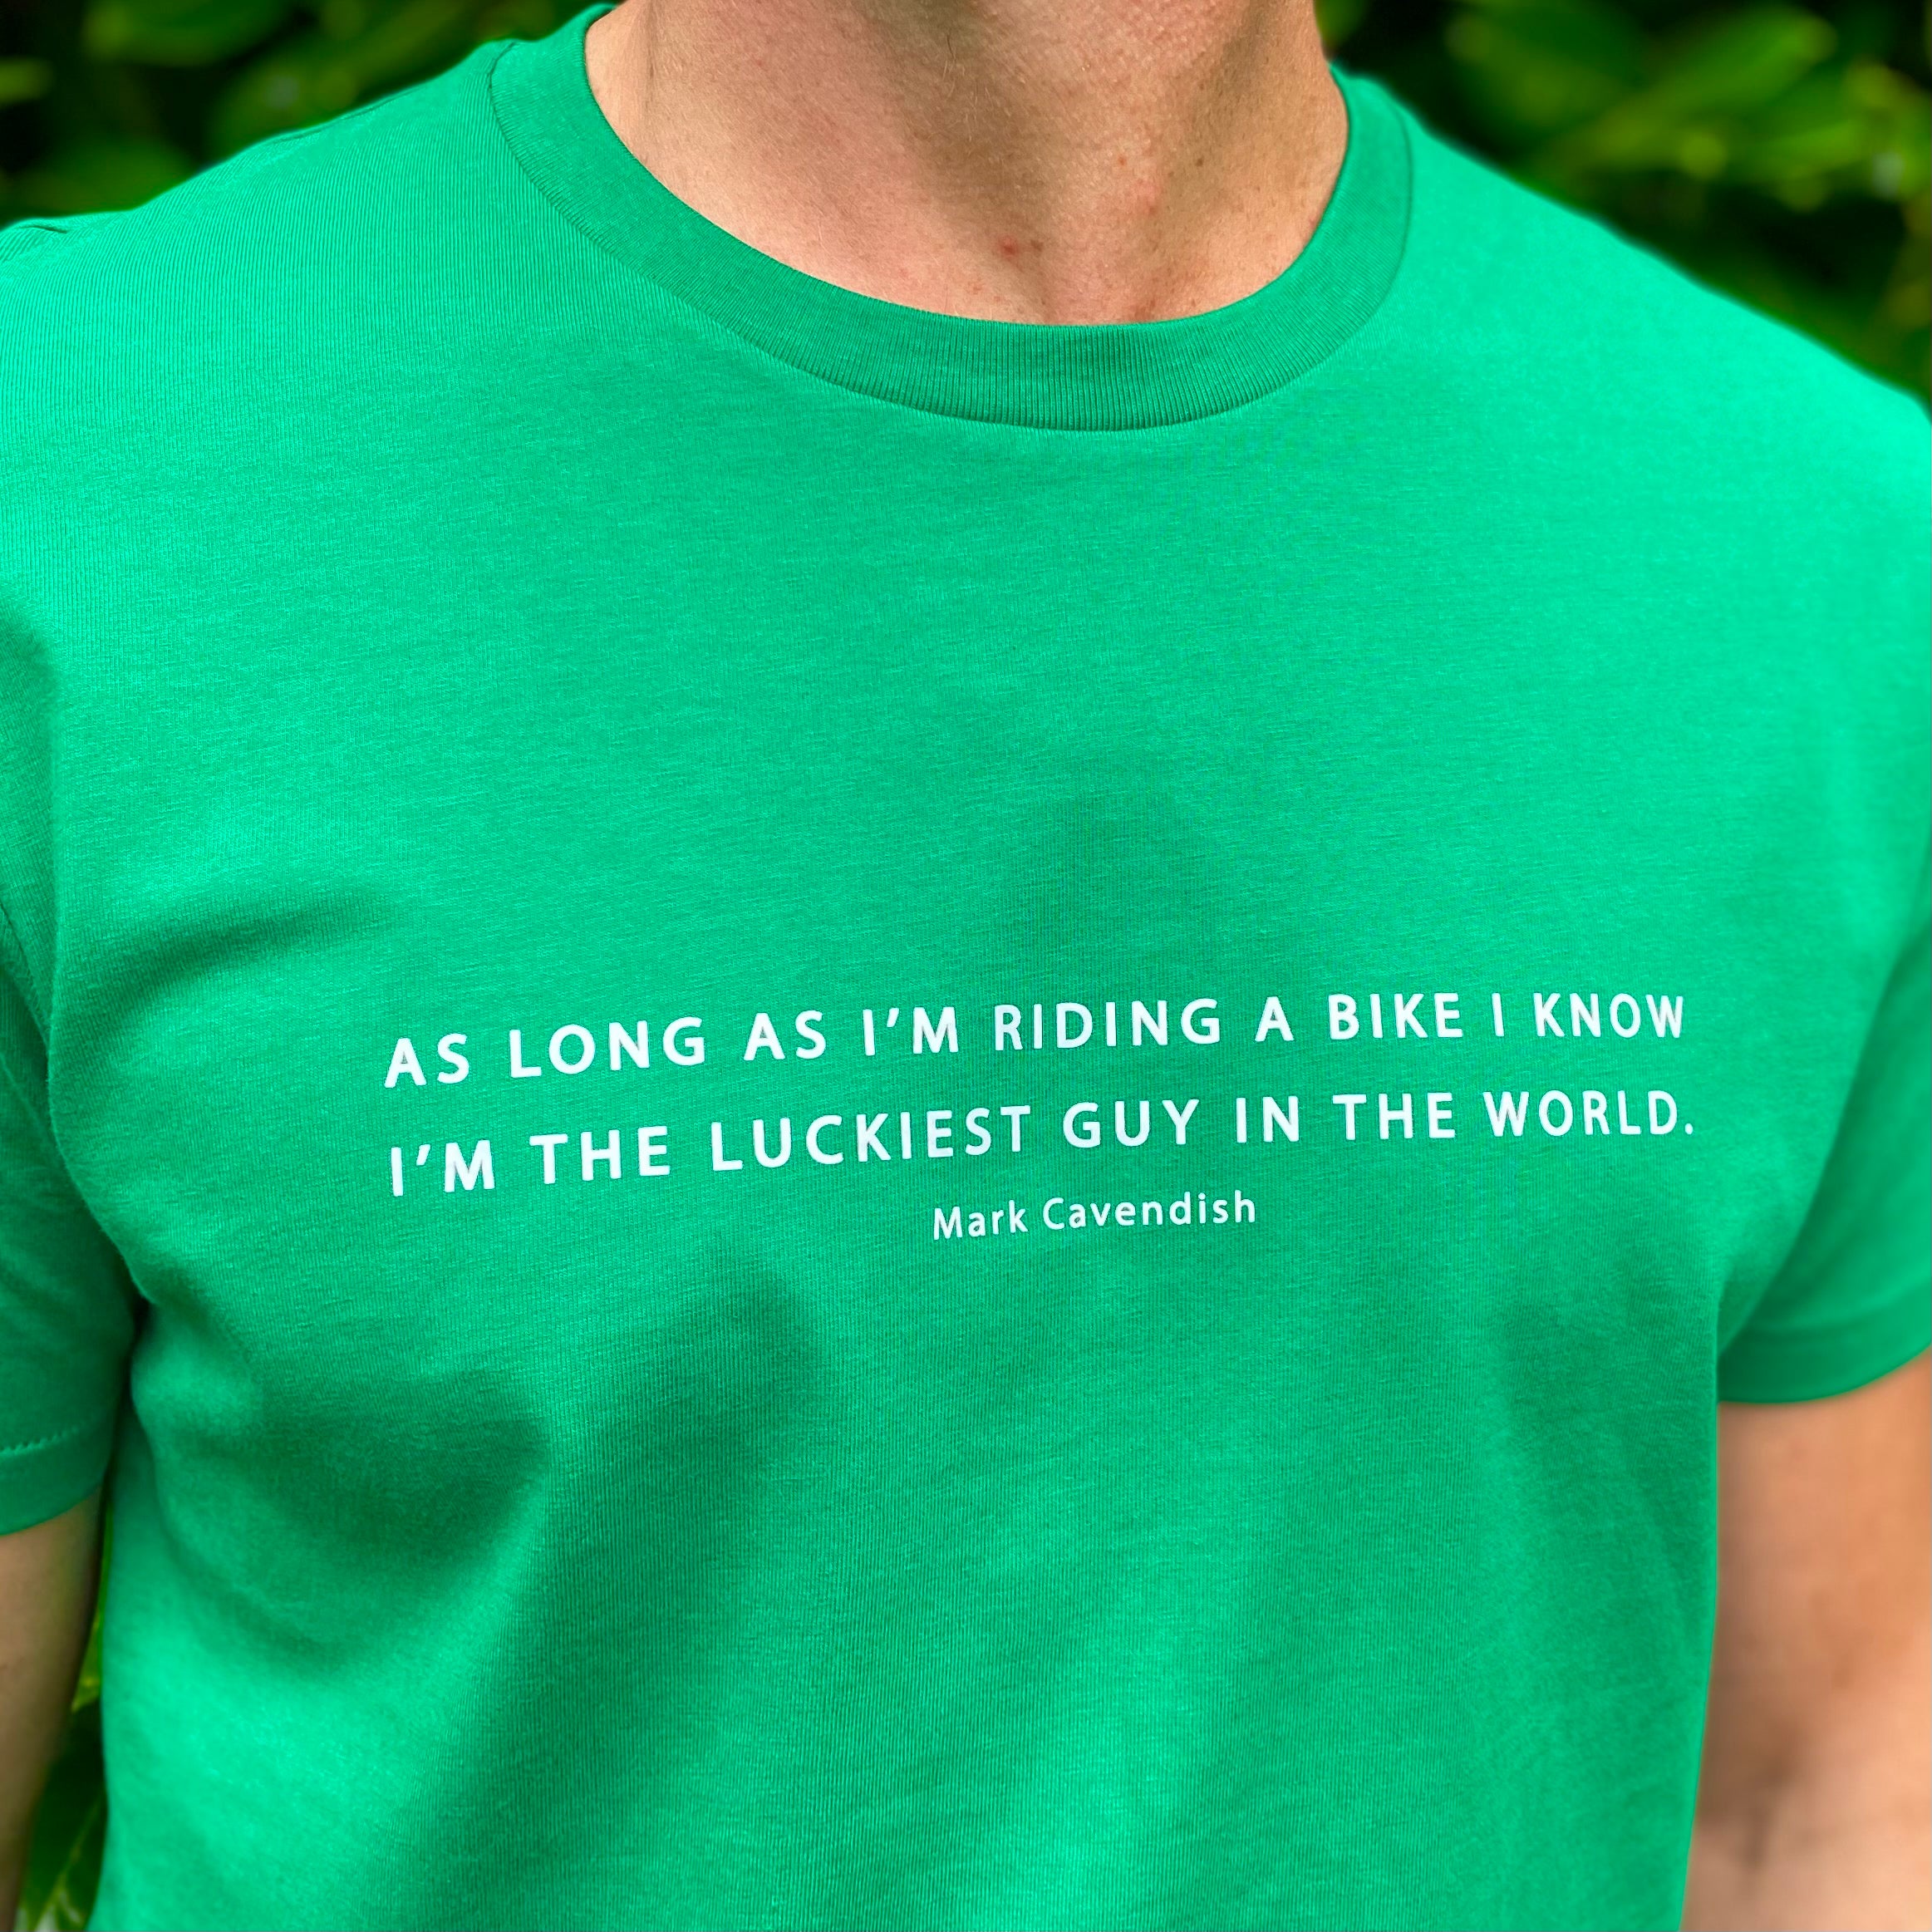 As long as I'm riding a bike, I know I'm the luckiest guy in the world - Mark Cavendish - T-Shirt - Spoke & Solace